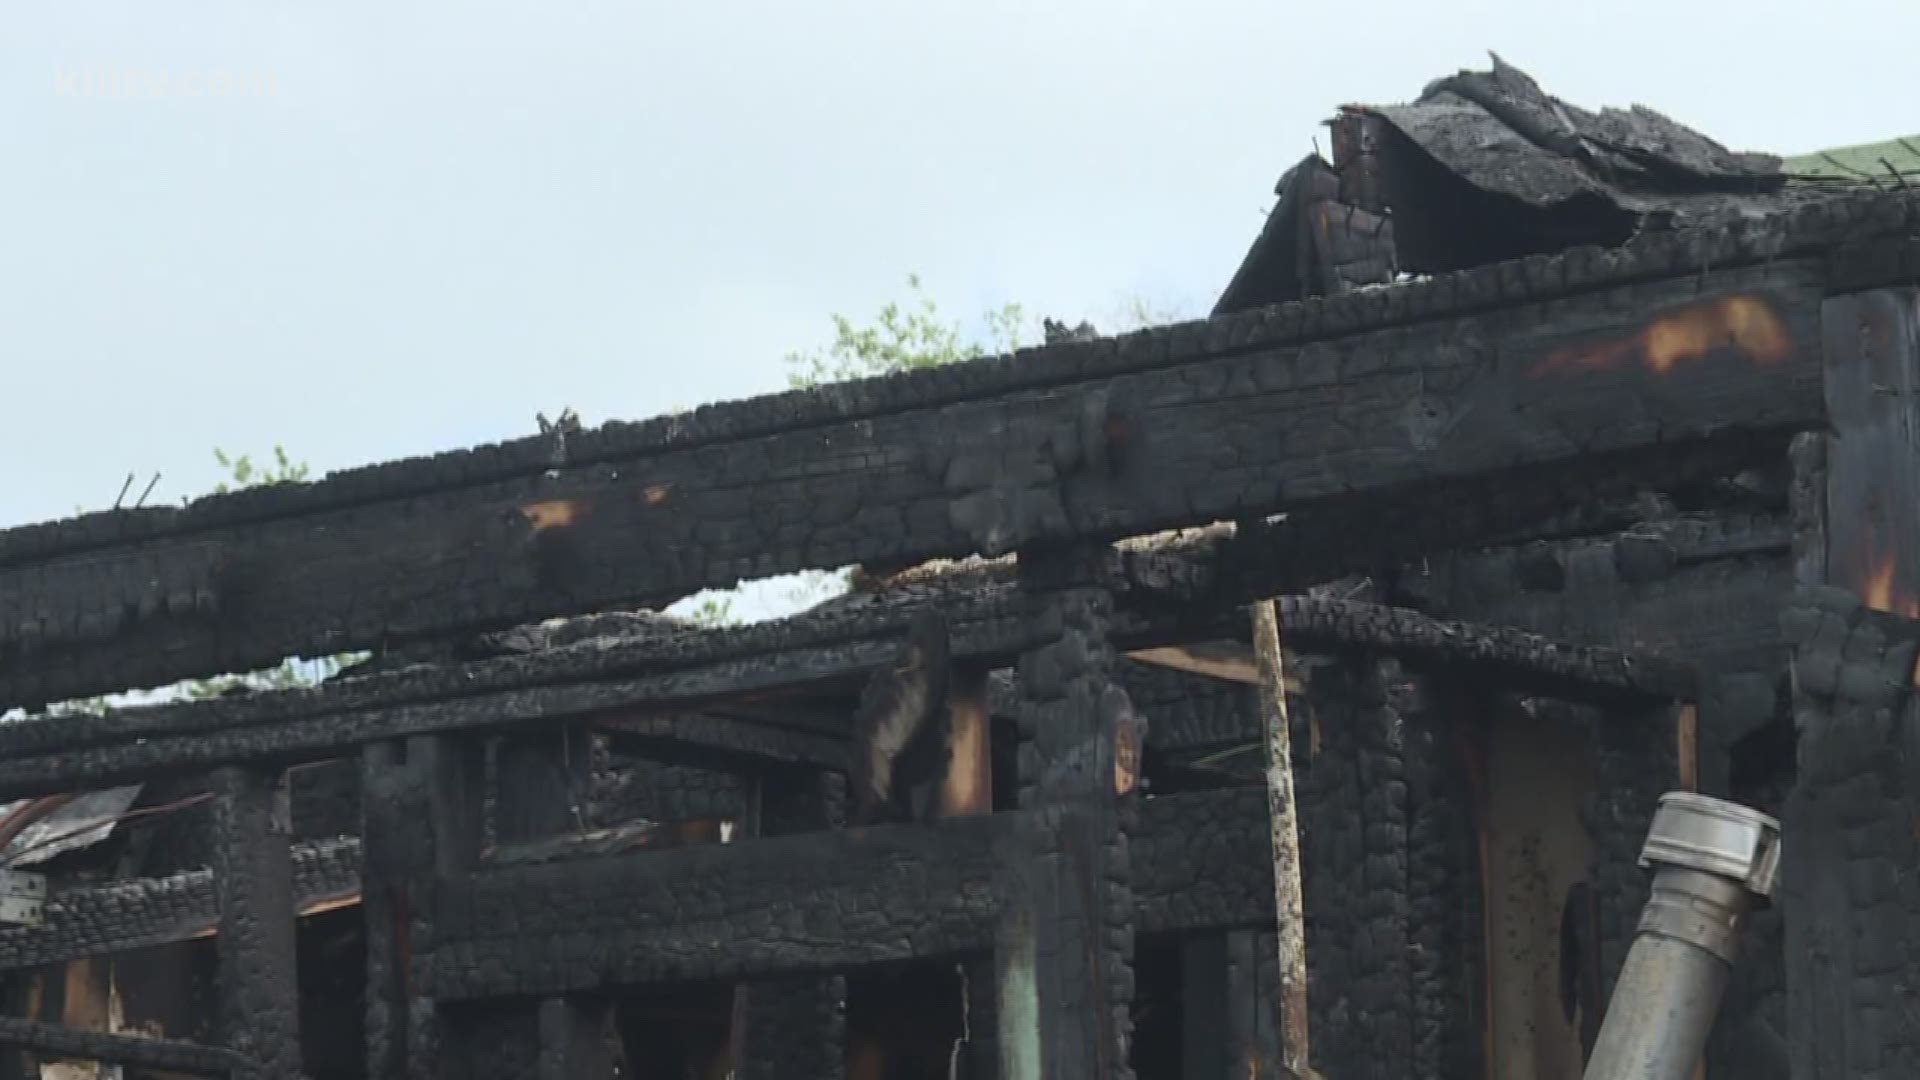 A Corpus Christi couple is thankful after escaping a devastating house fire overnight.